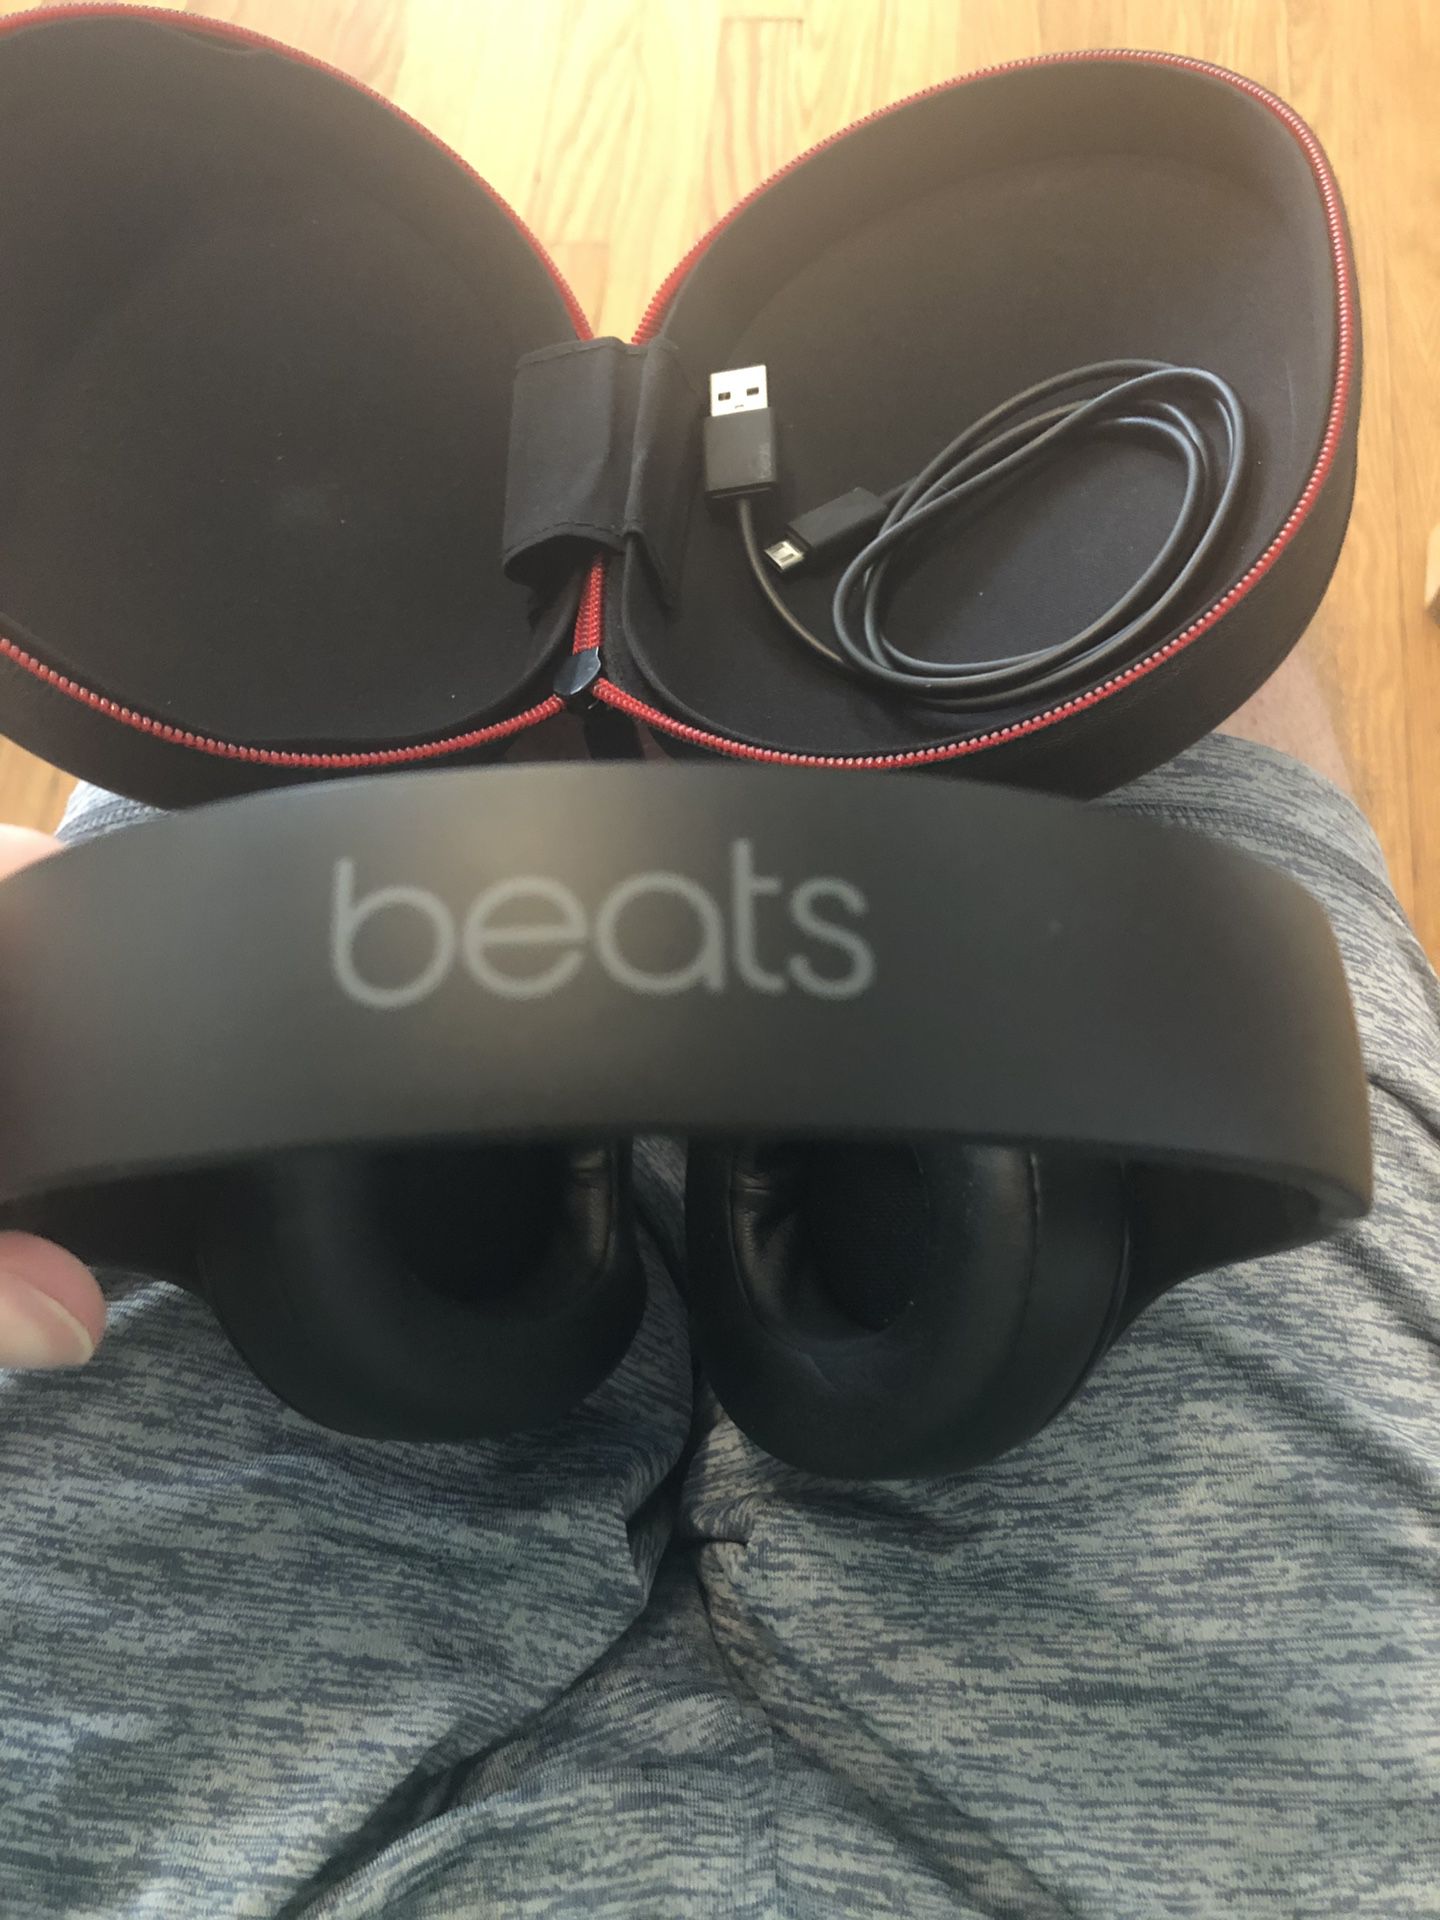 Beats over ear wireless headphones with noise canceling